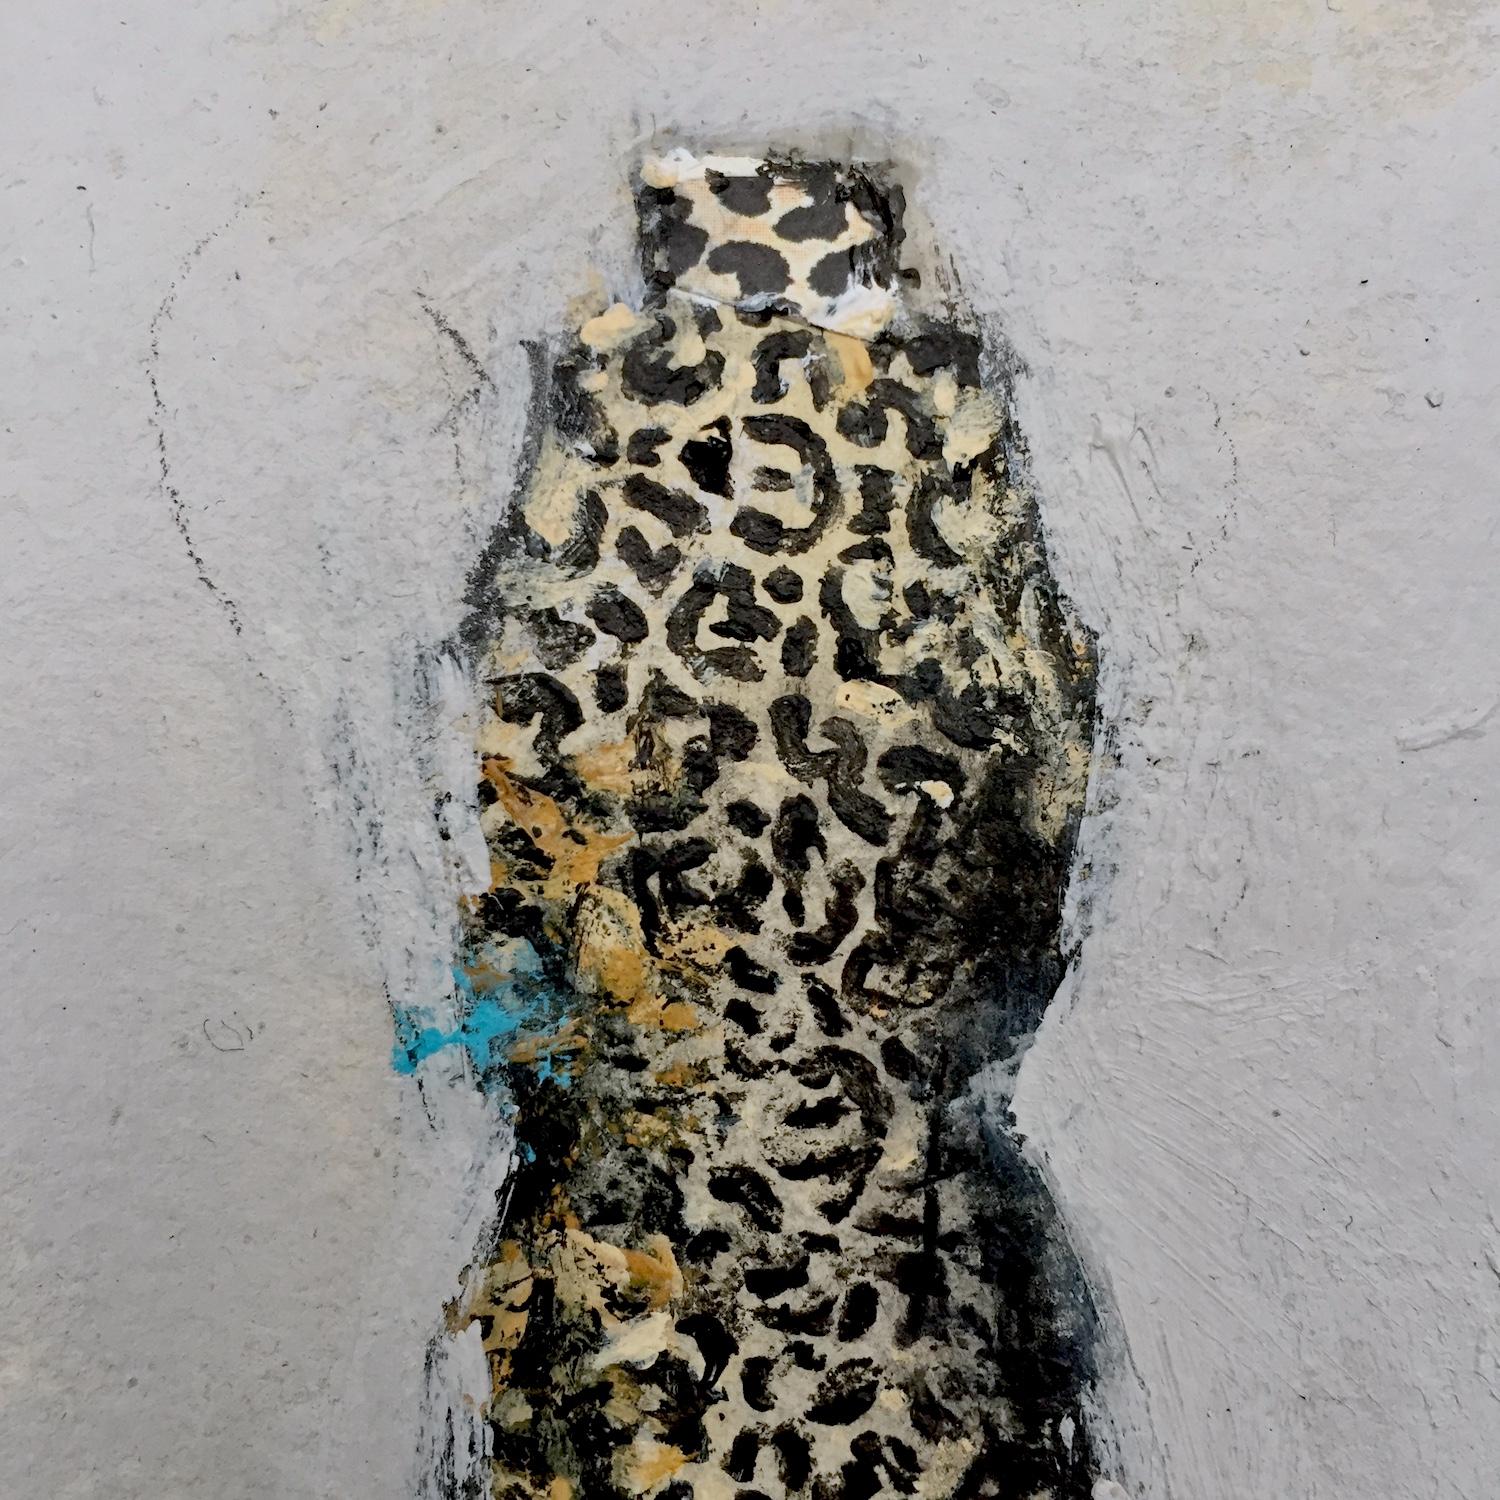 This delicate leopard print dress is an artwork on paper blending paint and color pencil. Composition, intuitive mark-making and loose textured detail make for an outcome both expressive and refined. The perfect addition to a personal art